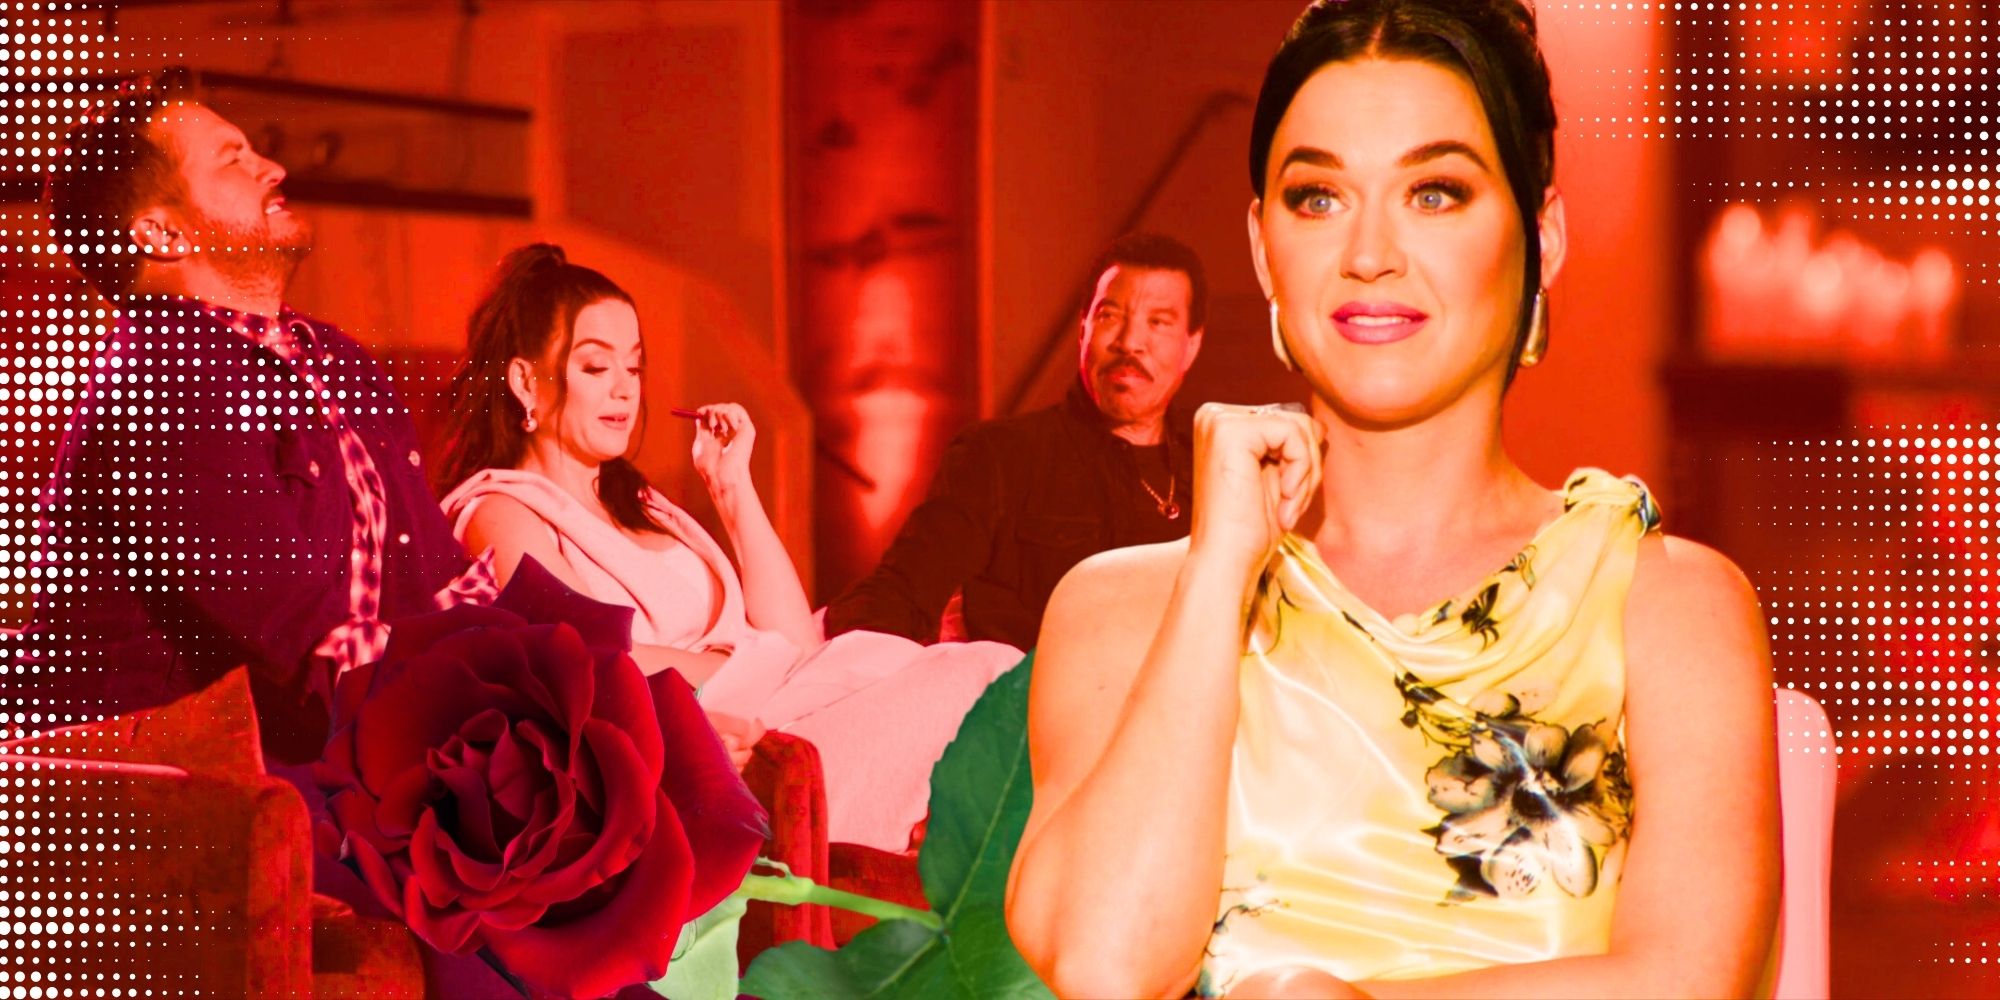 American Idol's Katy Perry, with judges Katy, Lionel Richie and Luke Bryan sitting next to each other in the background, with a red rose underneath them